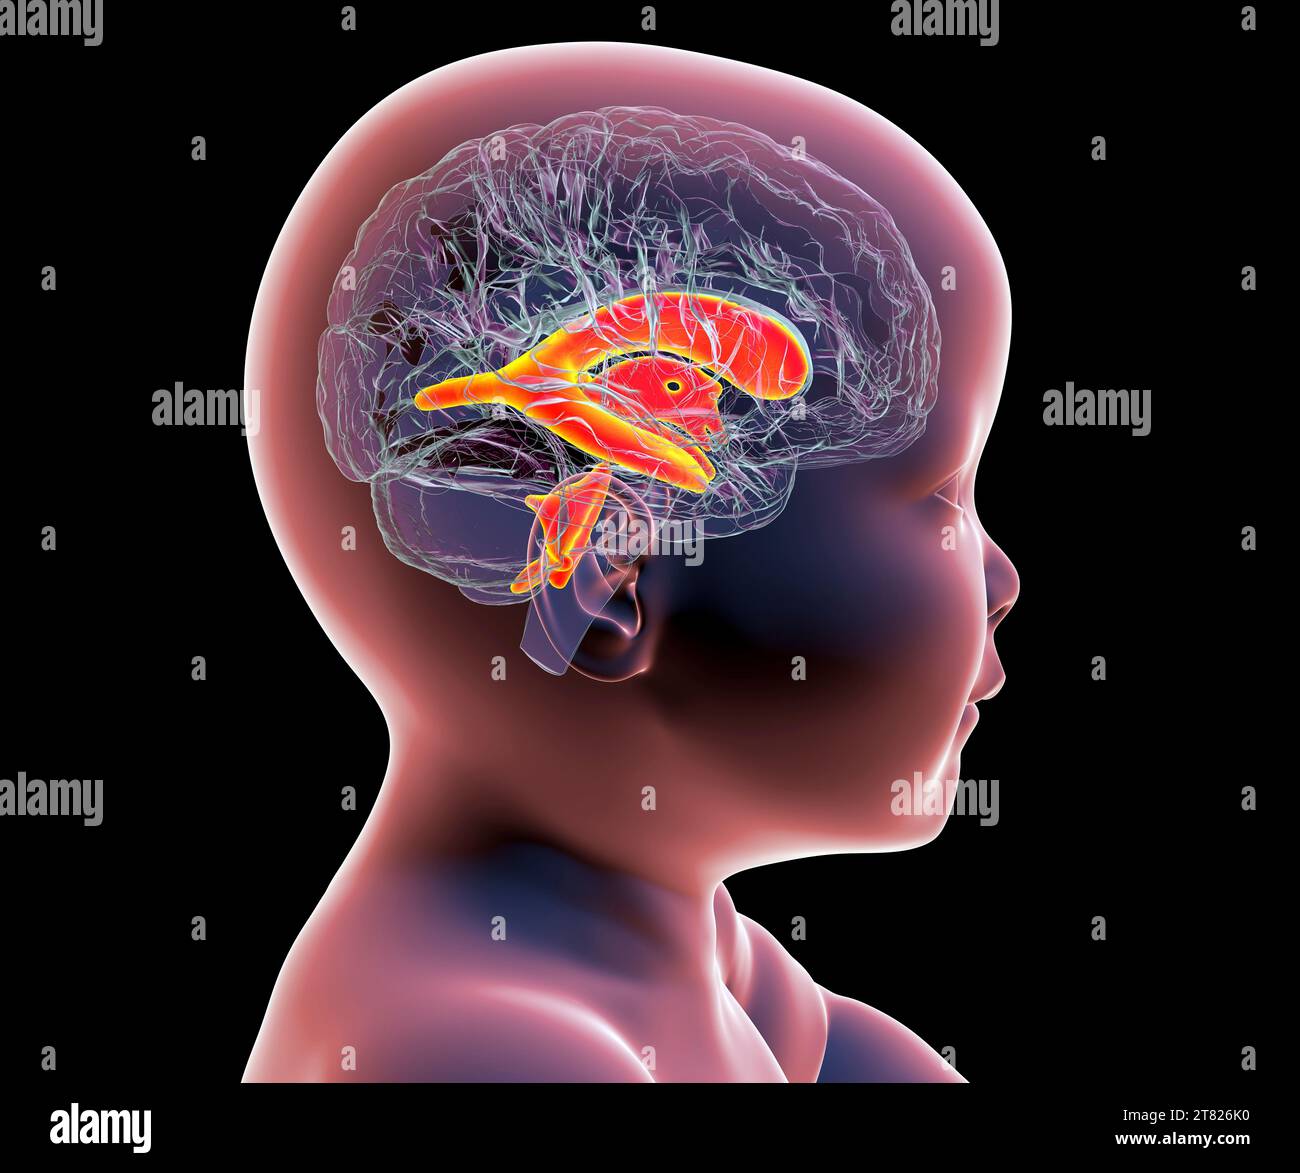 Baby with normal brain ventricles, illustration Stock Photo